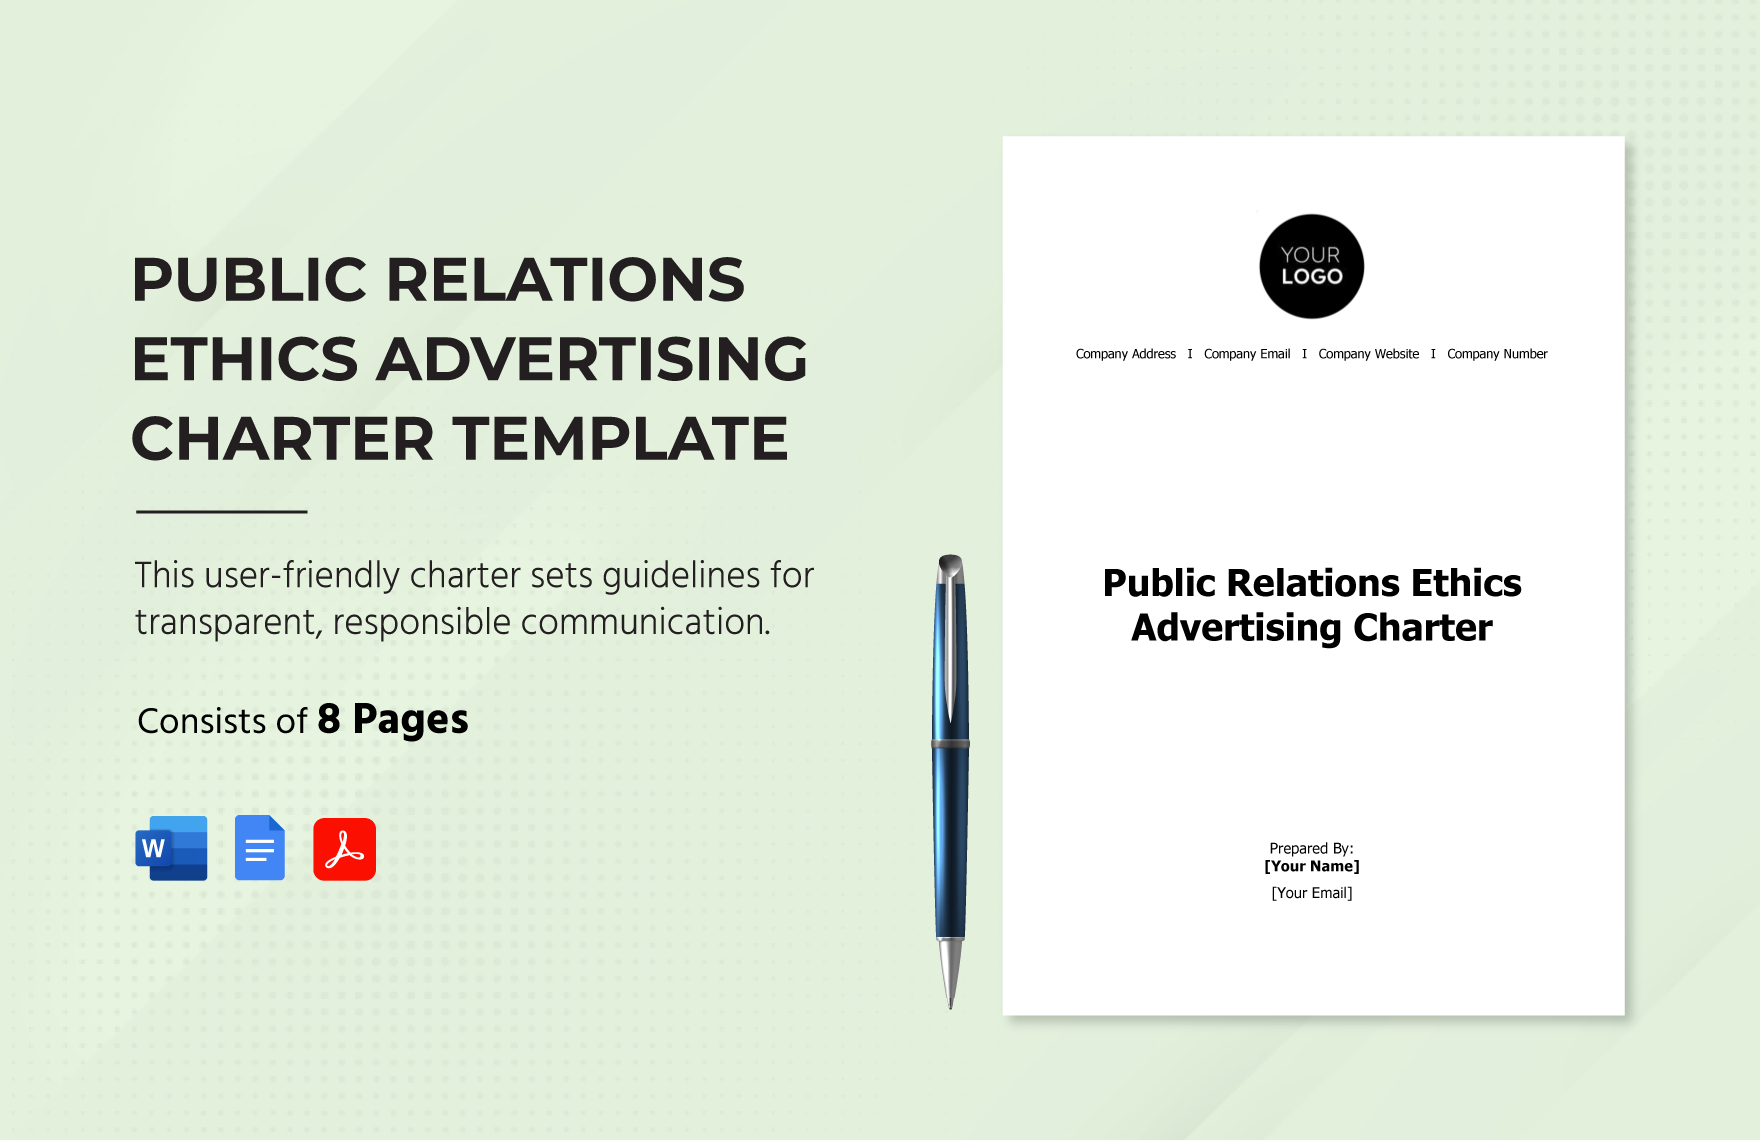 Public Relations Ethics Advertising Charter Template